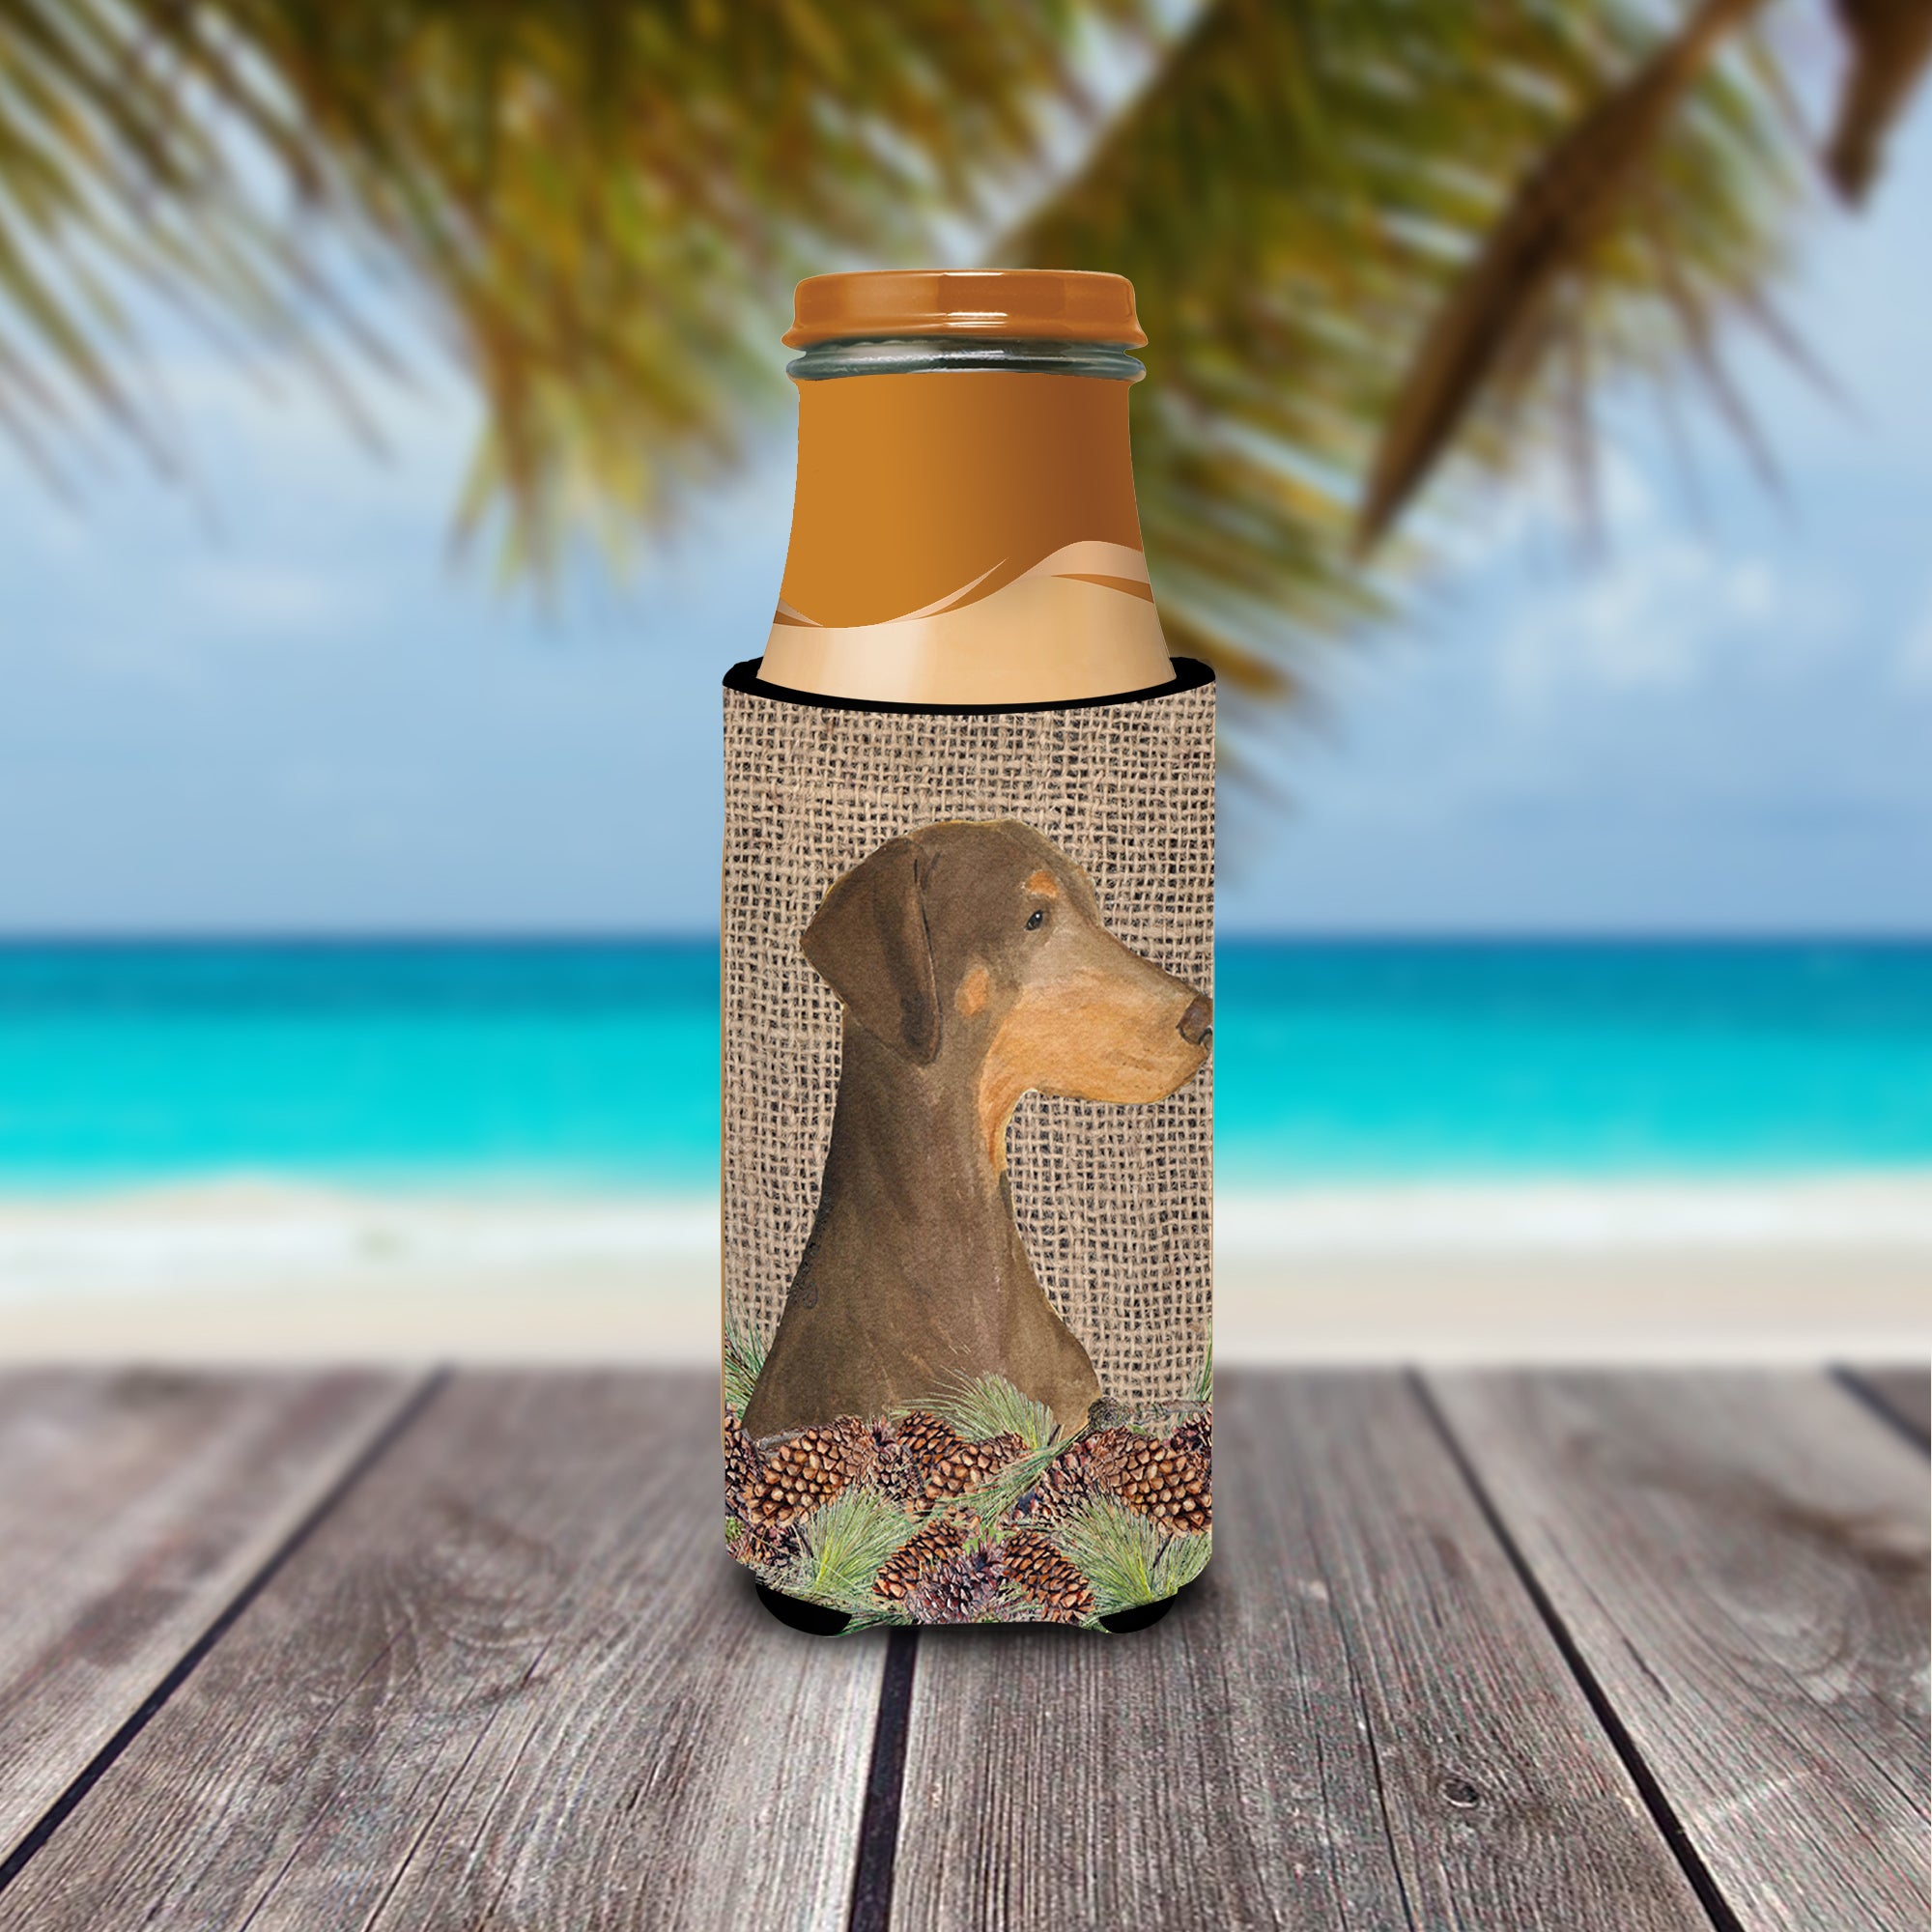 Doberman on Faux Burlap with Pine Cones Ultra Beverage Insulators for slim cans SS4070MUK.